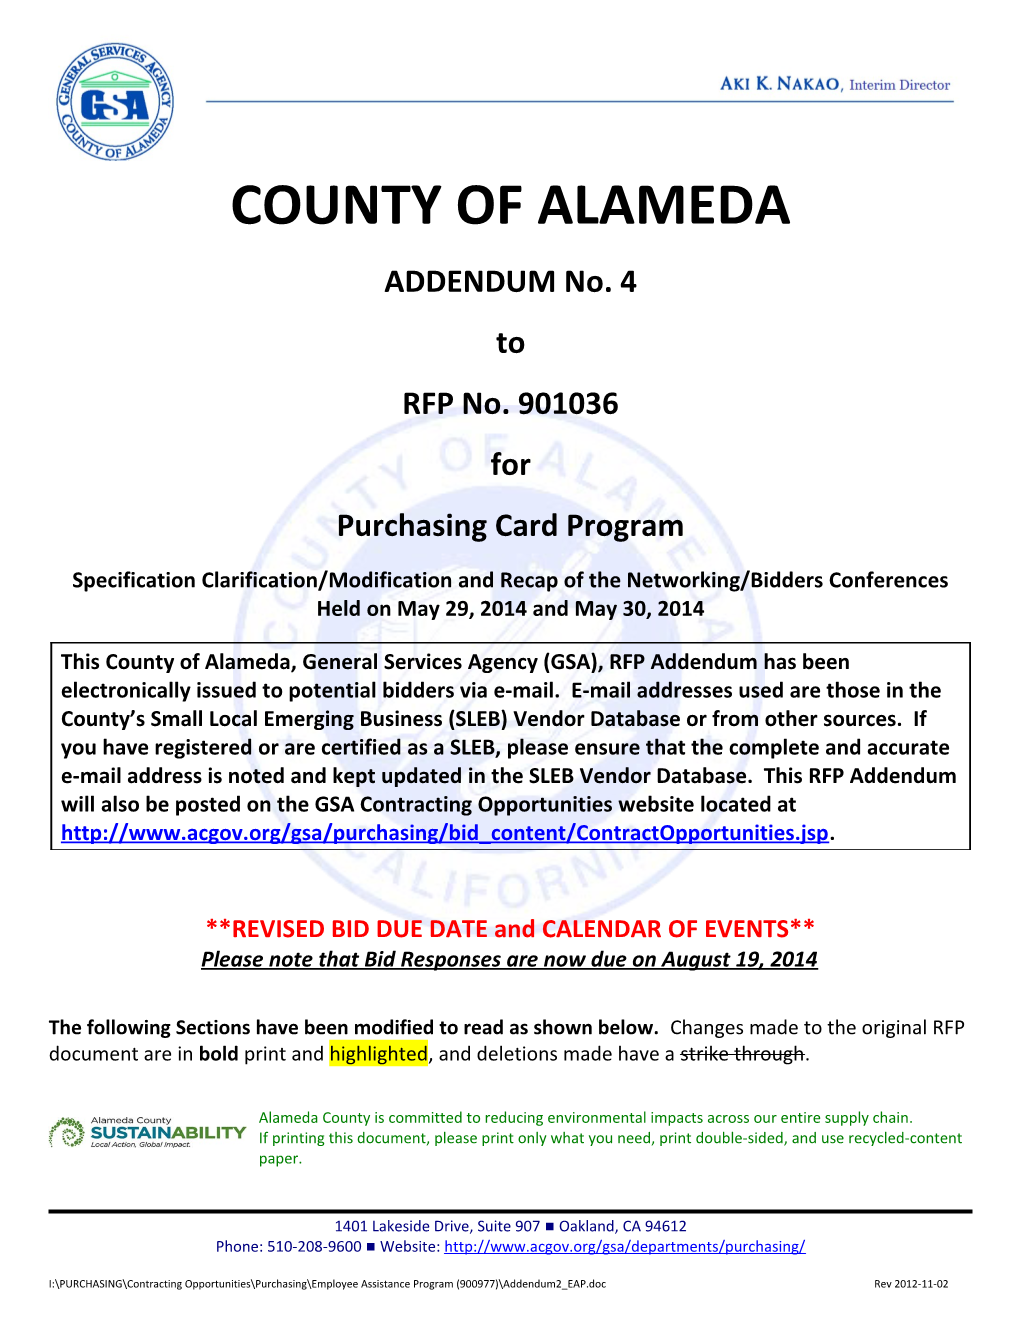 County of Alameda, General Services Agency Purchasing